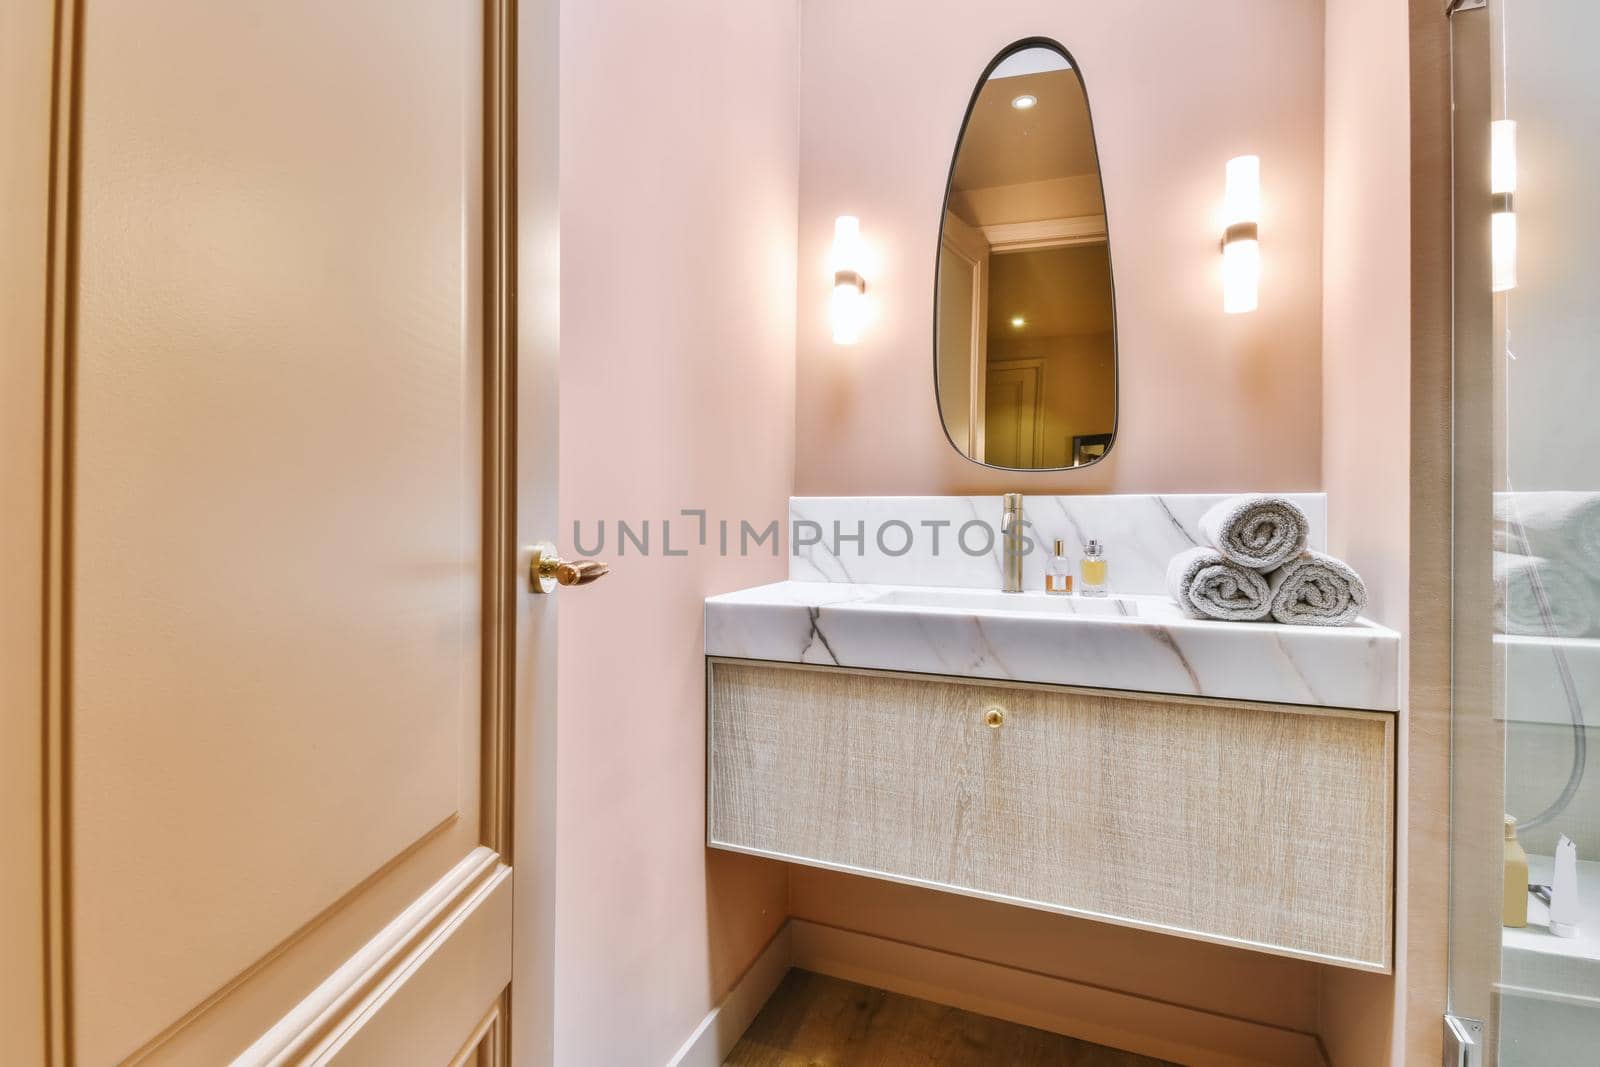 Luxurious washroom with peach walls and marble top and sink